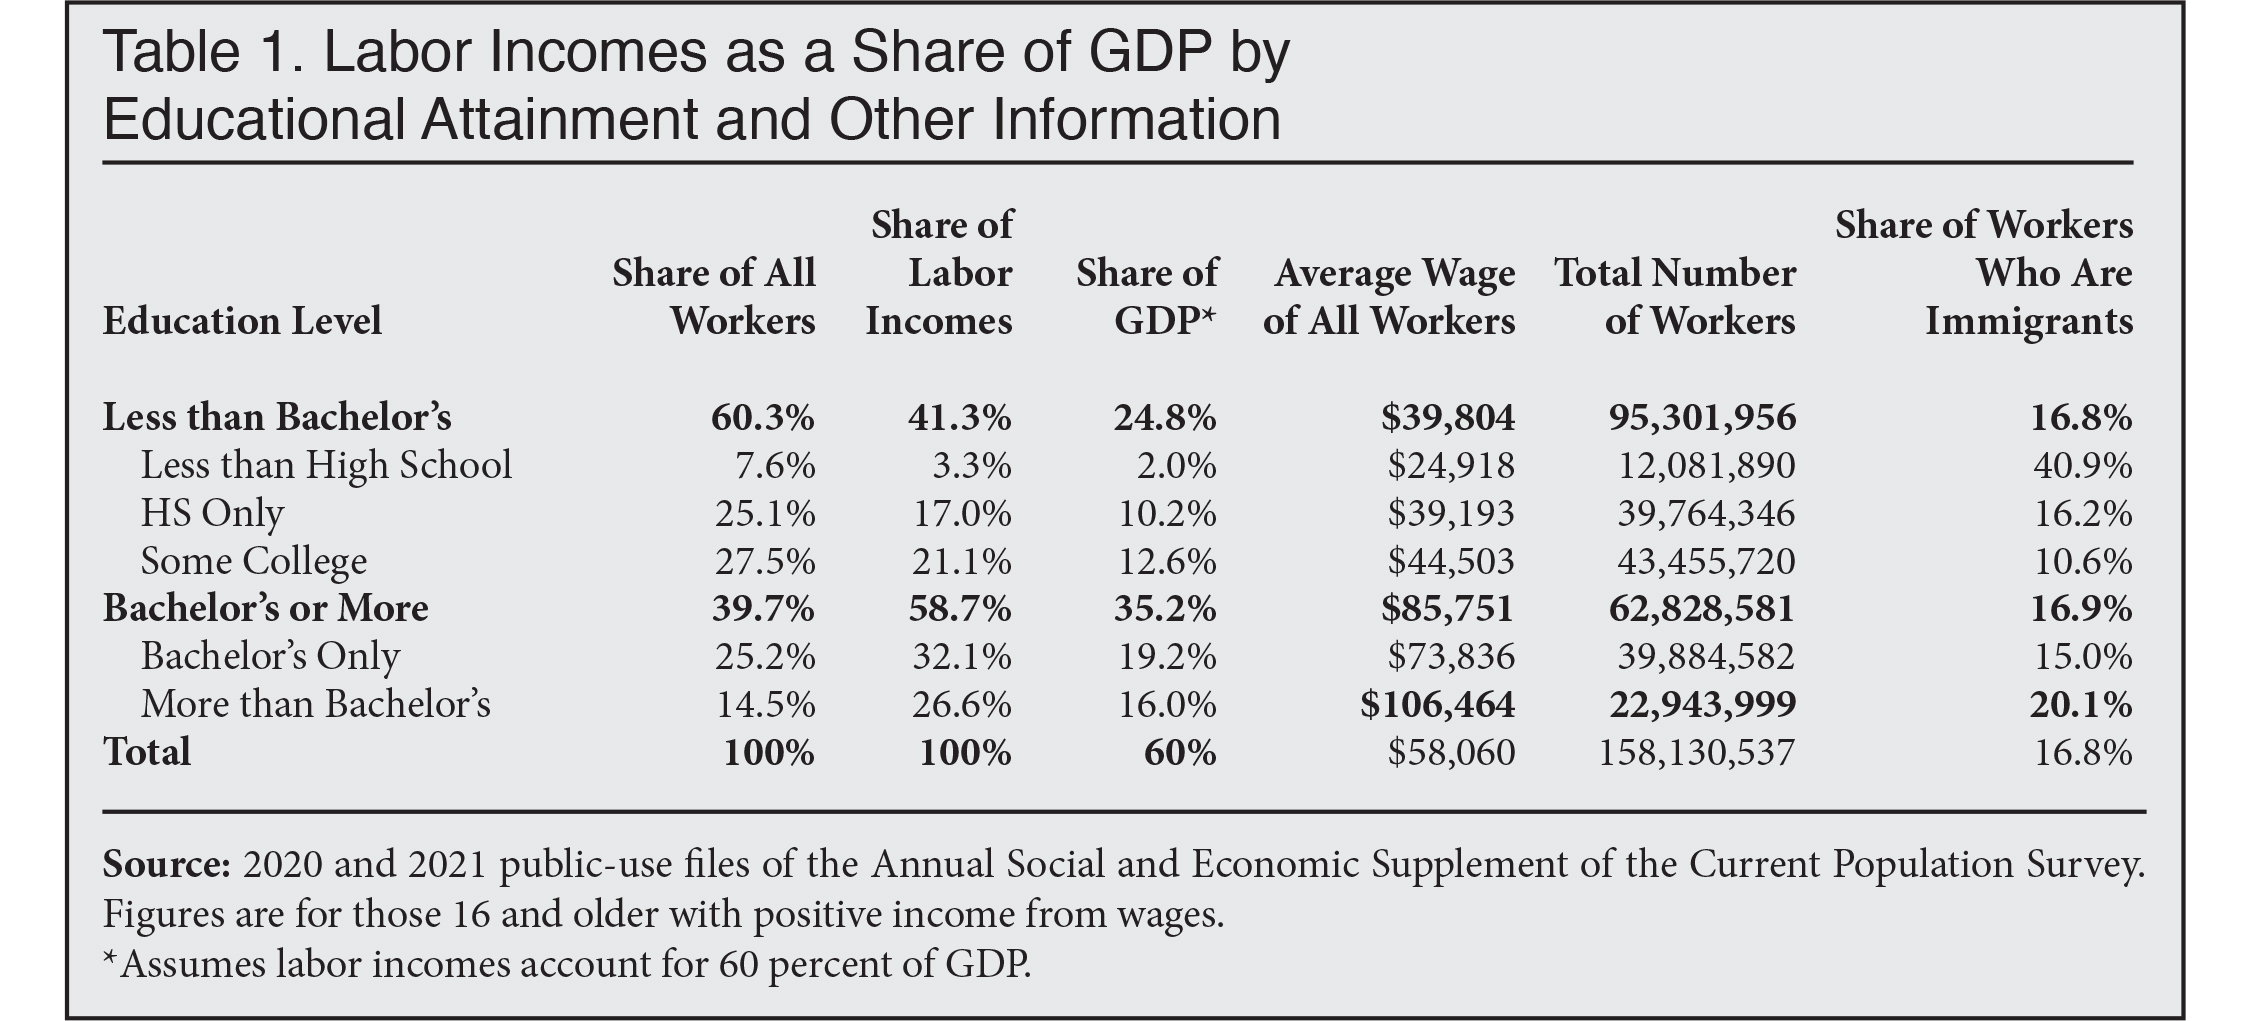 Table: Labor Incomes as a Share of GDP by Educational Attainment and Other Information